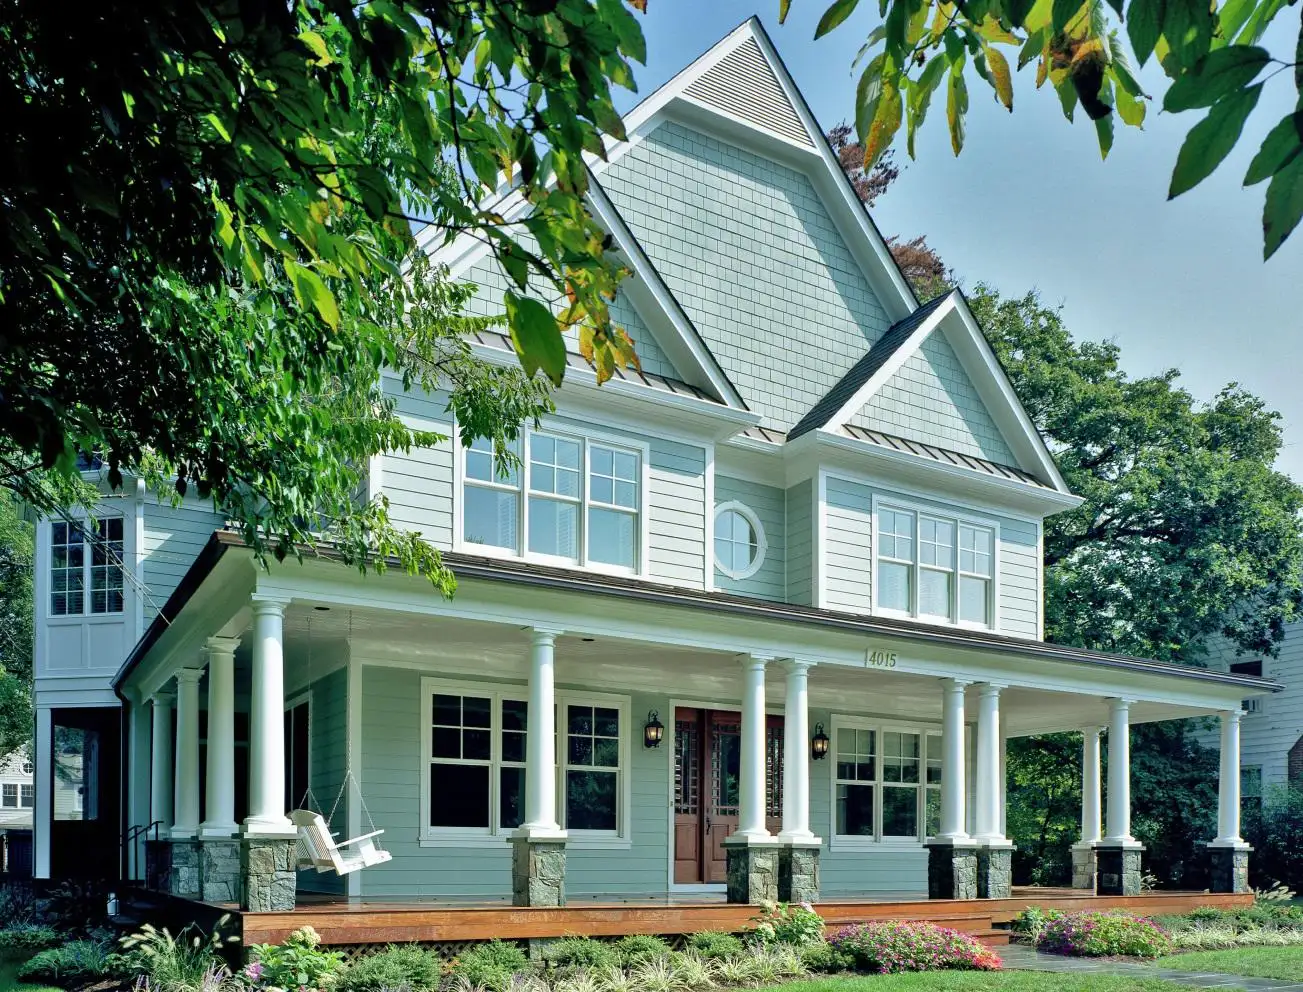 Celebrate American heritage with farm-style houses